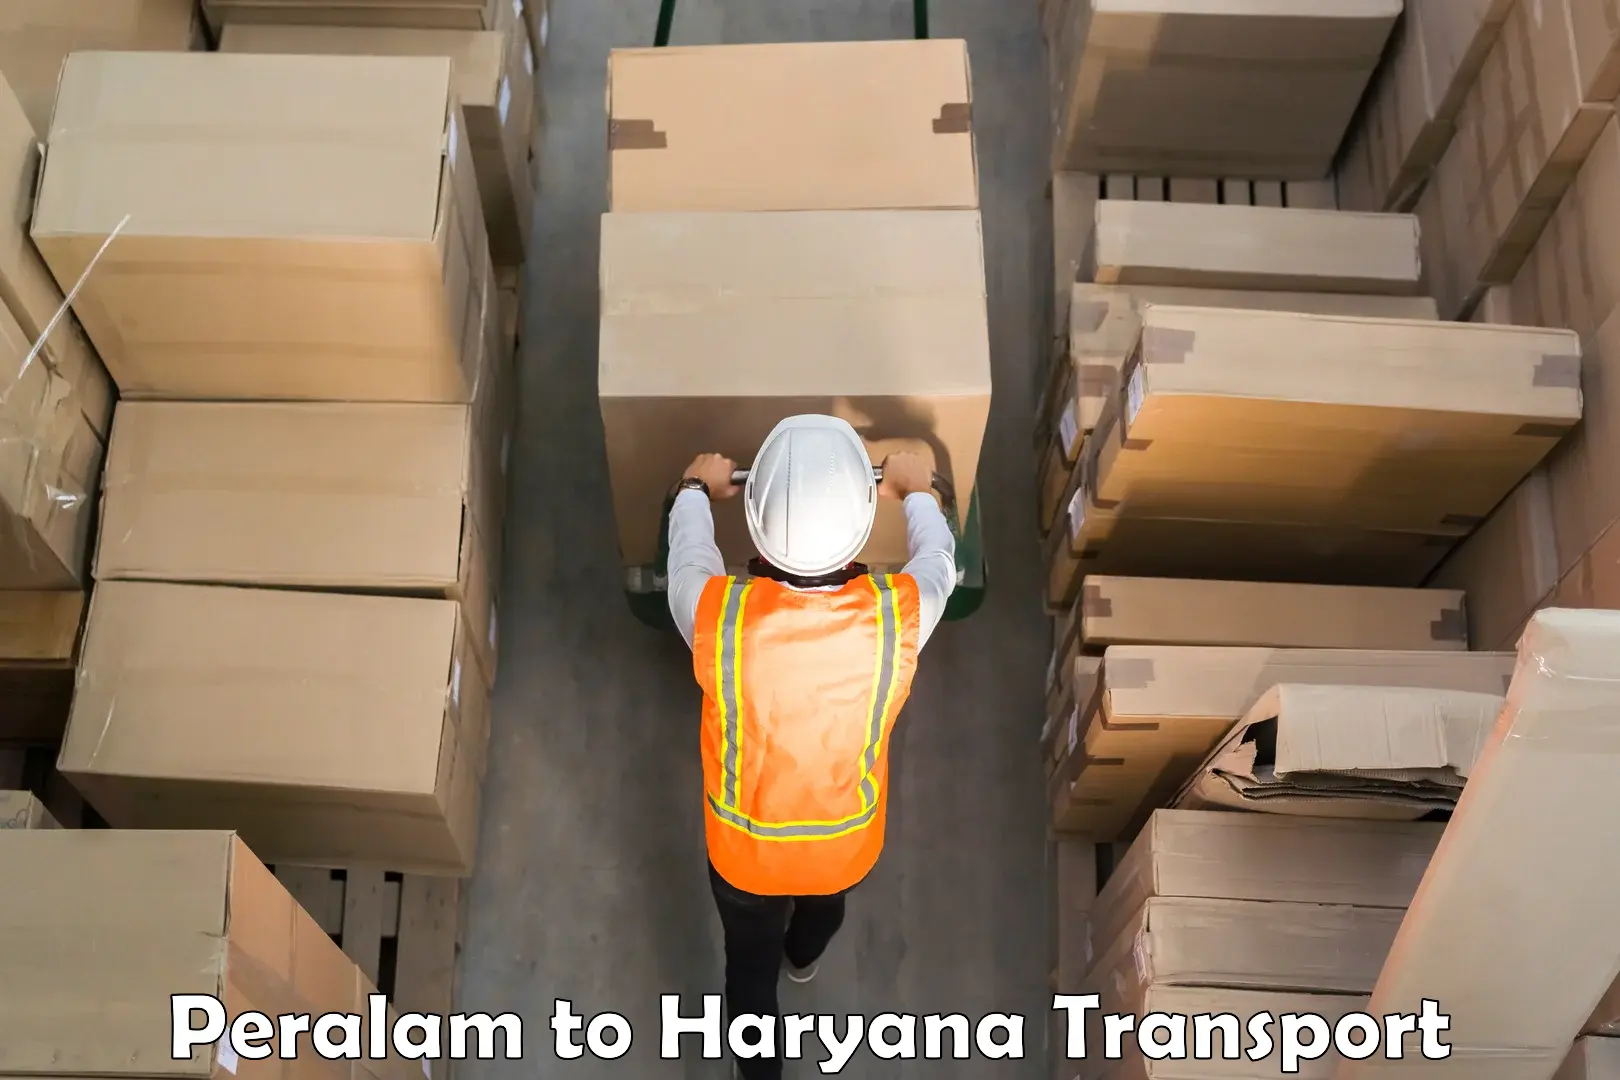 Part load transport service in India Peralam to Gurgaon